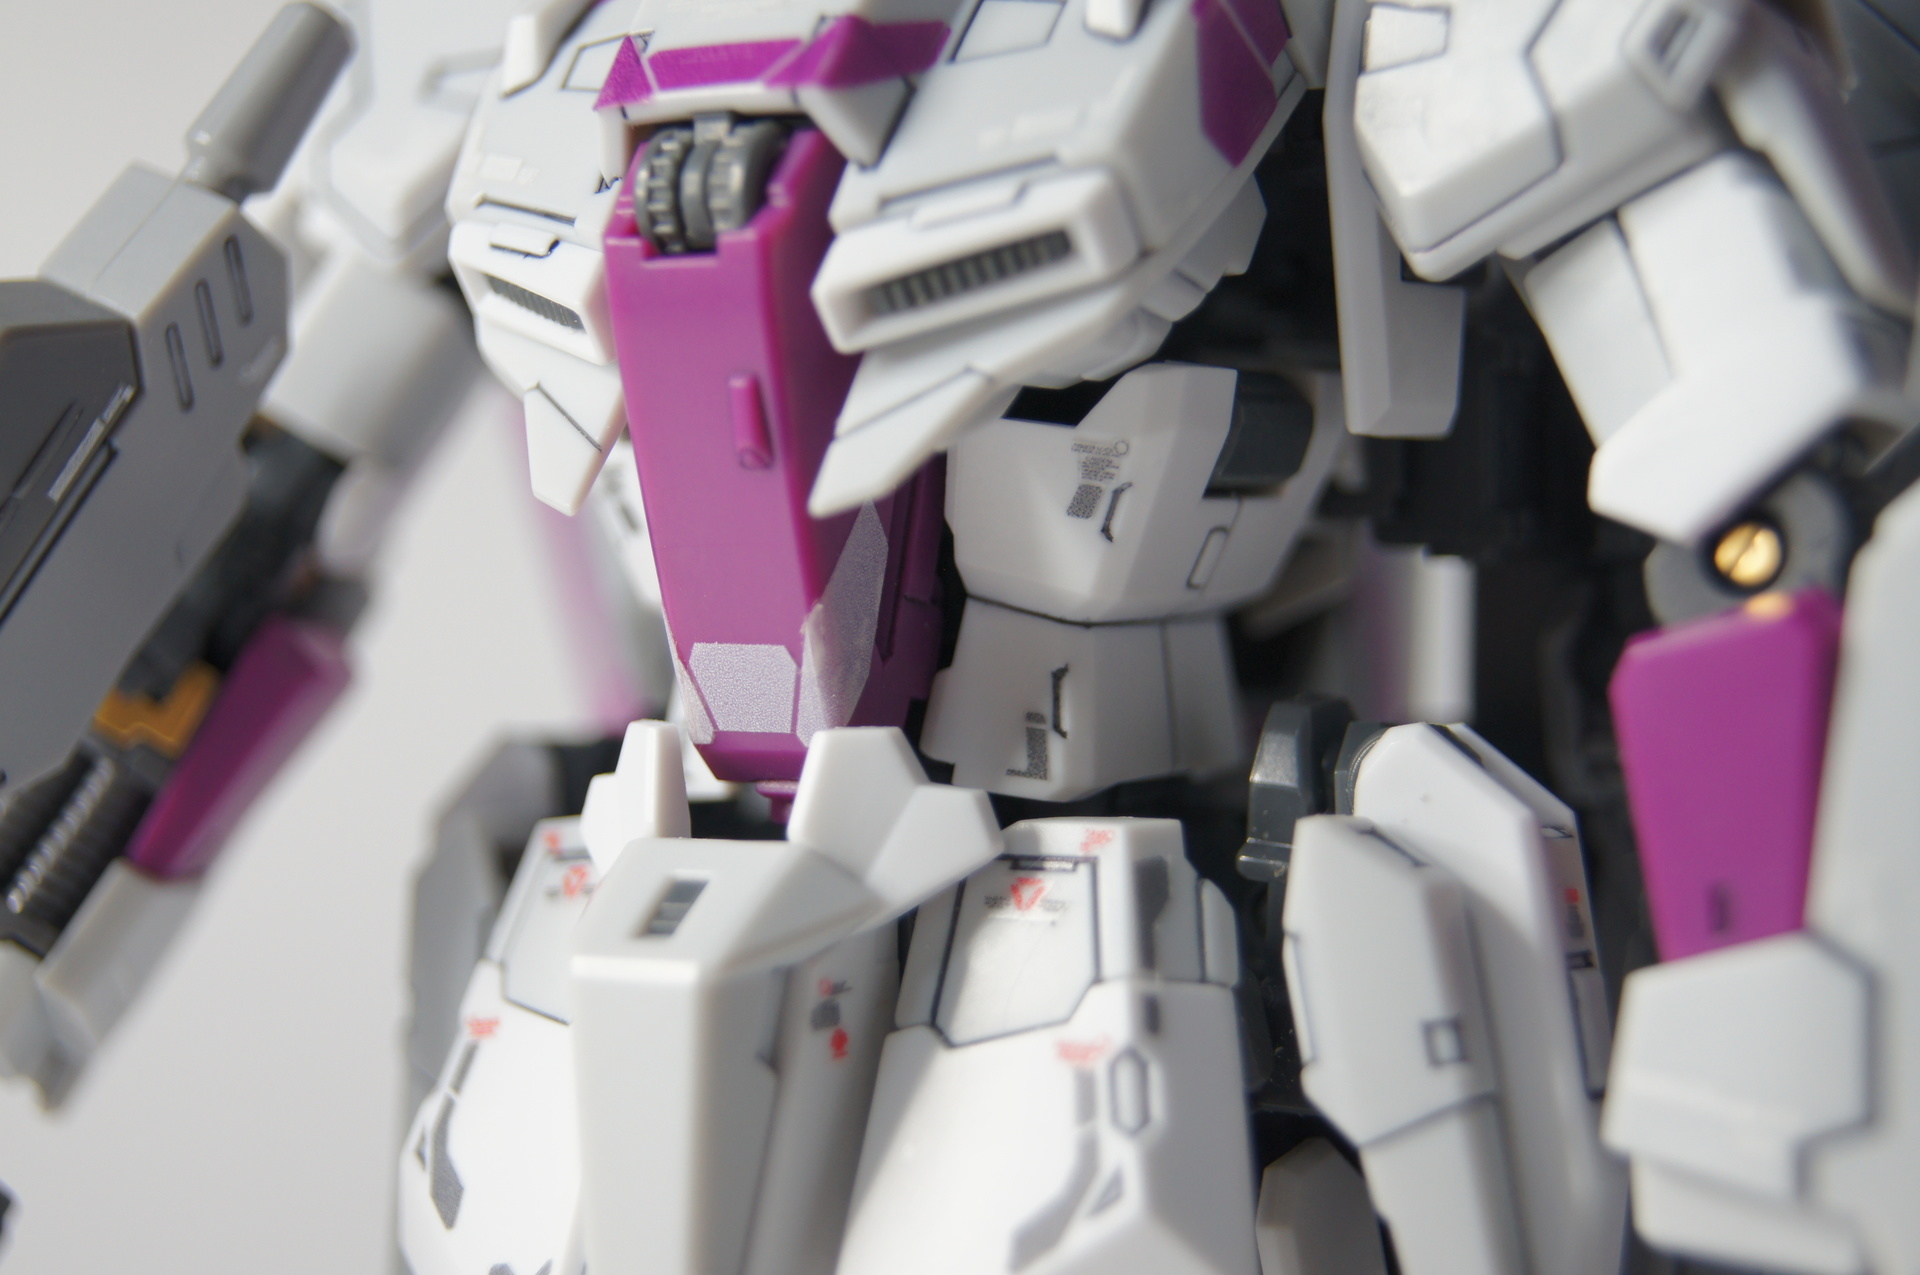 Rg Zガンダム3号機 初期検証型 Ver Gft Limited Color 8 878の あすなろ う